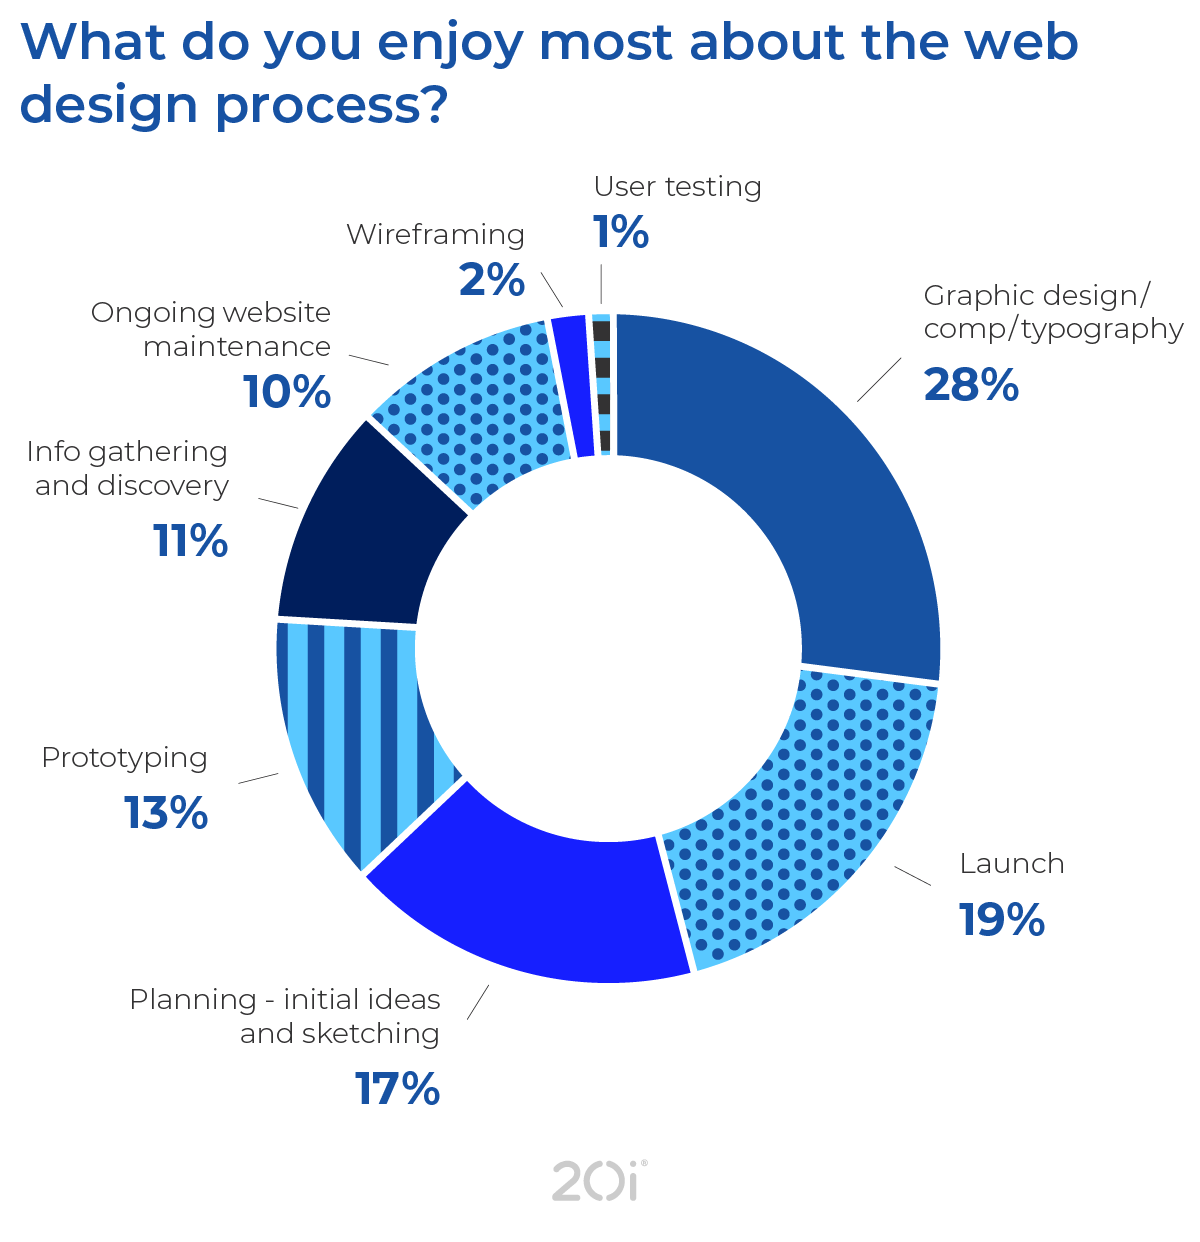 Web designers' favourite tasks: survey results on what they enjoy the most